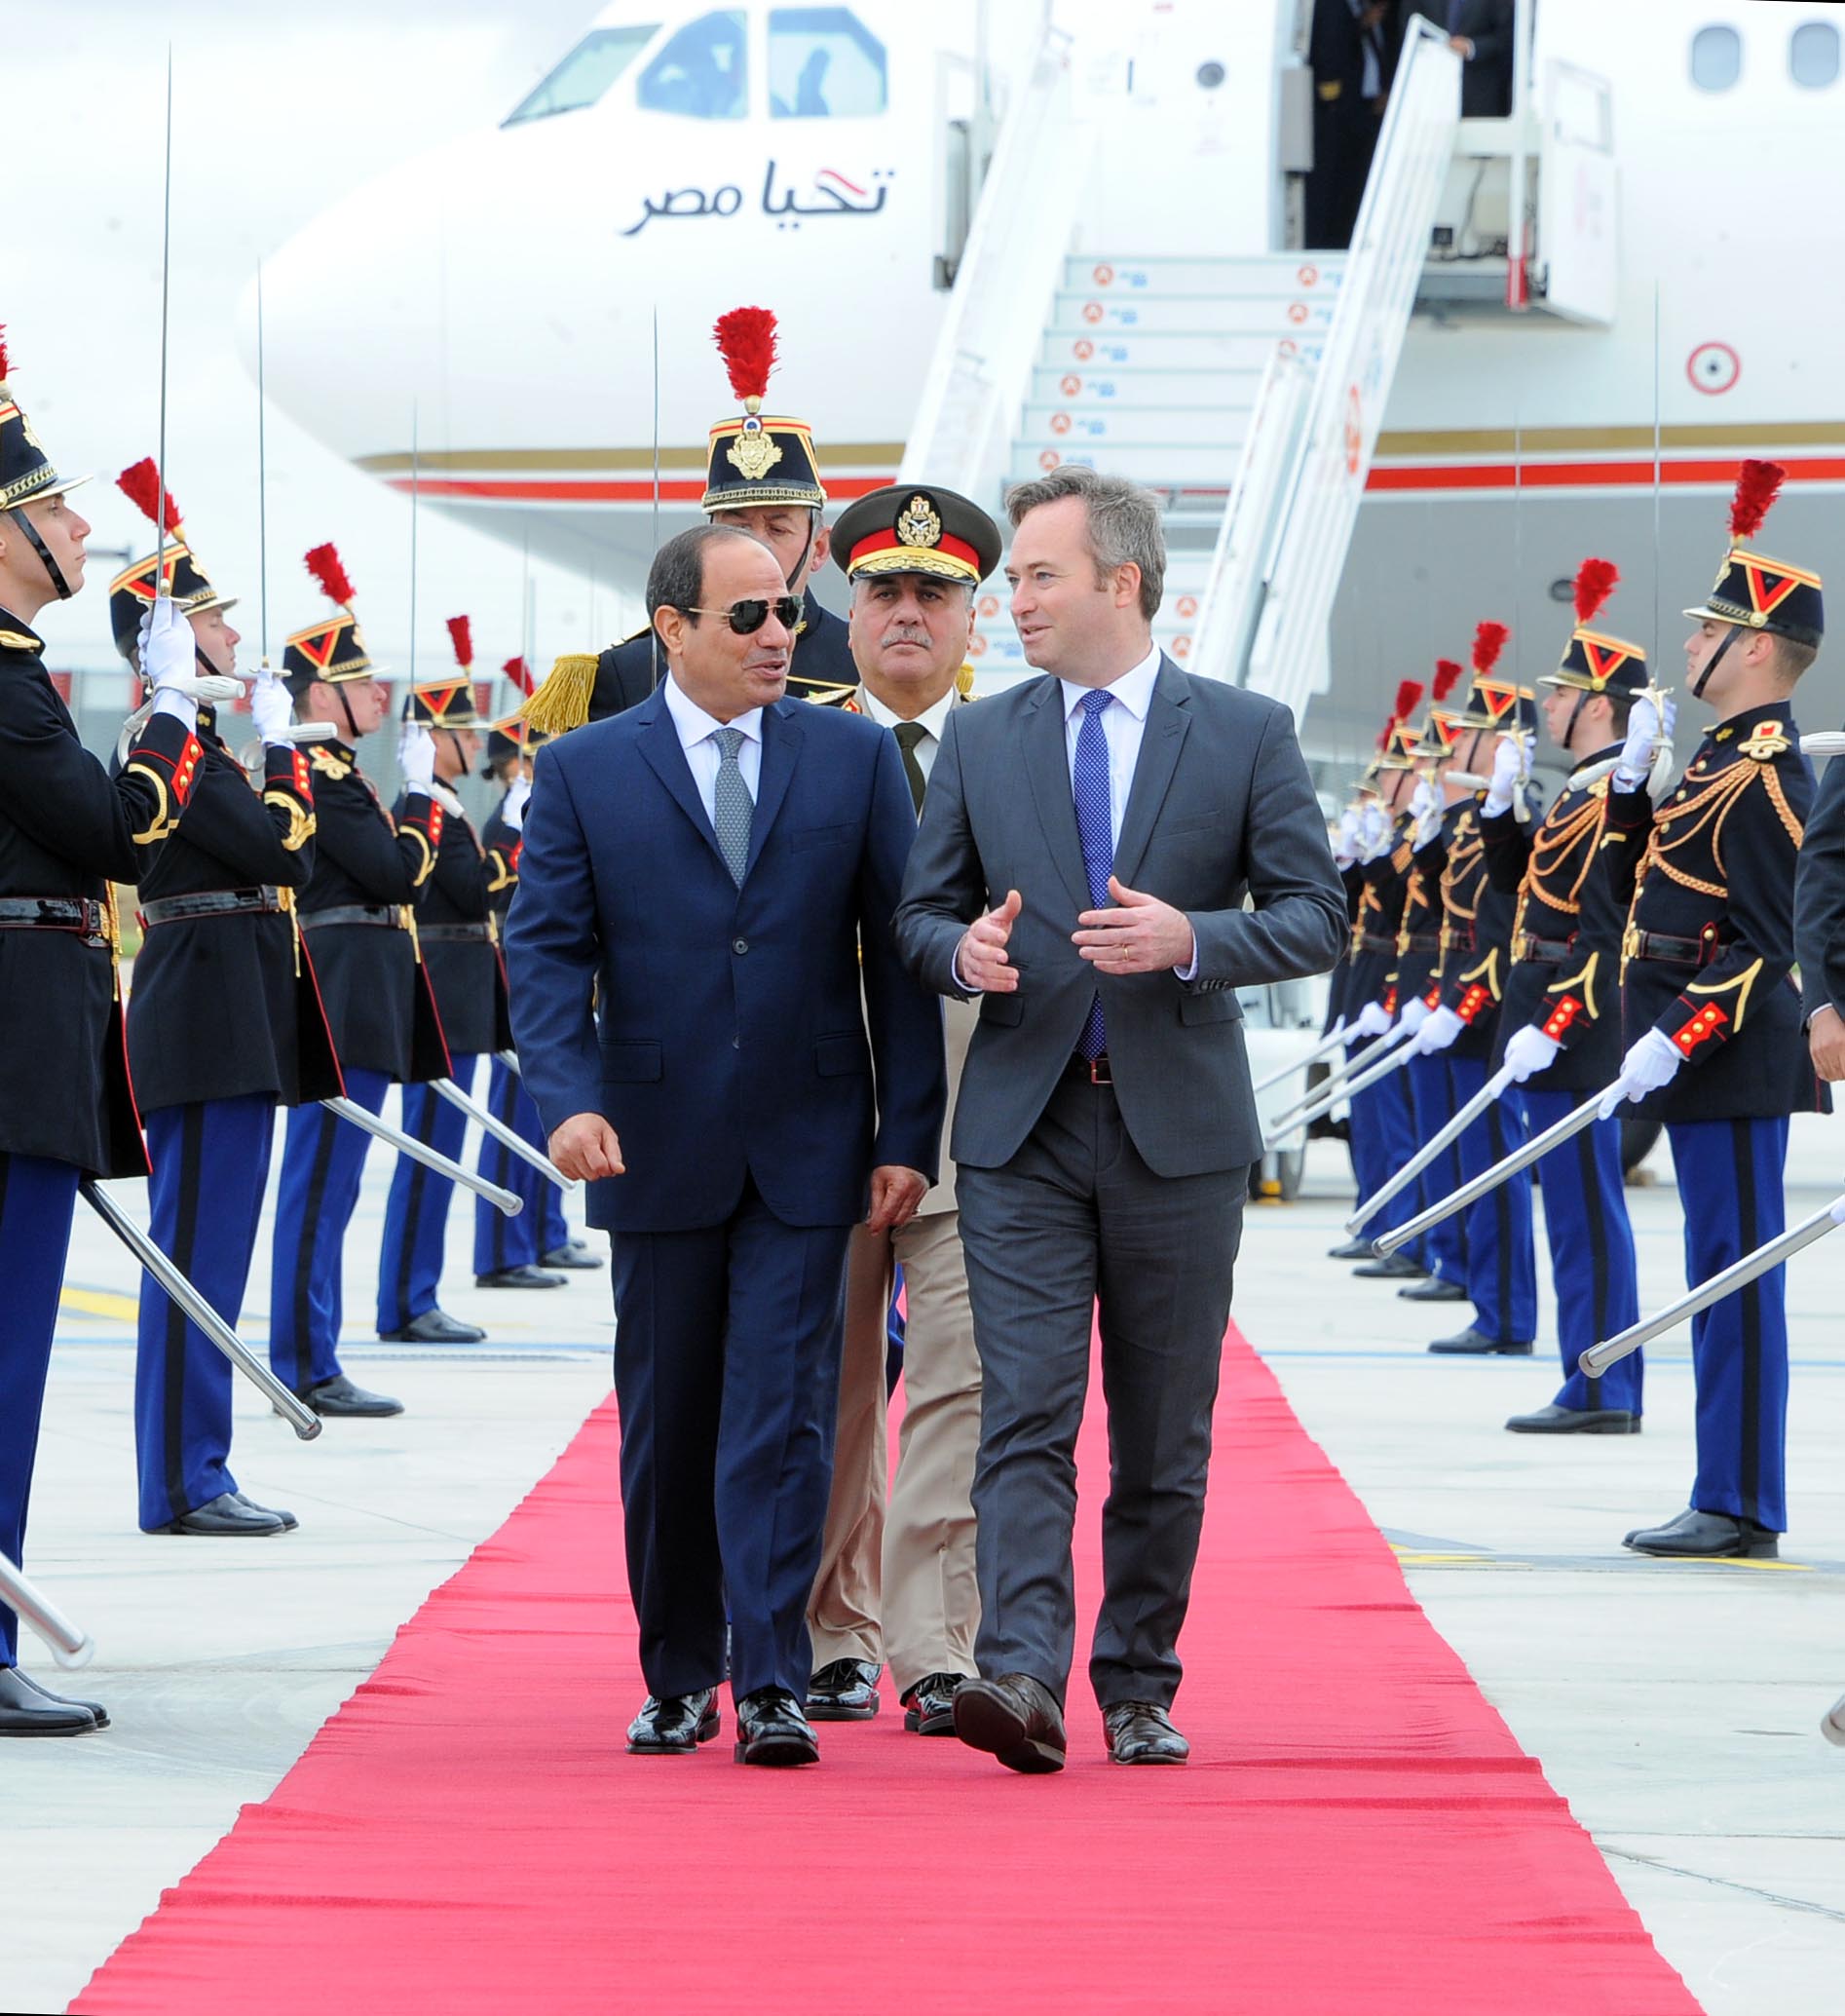 Sisi's visit to France will strengthen relations: diplomat